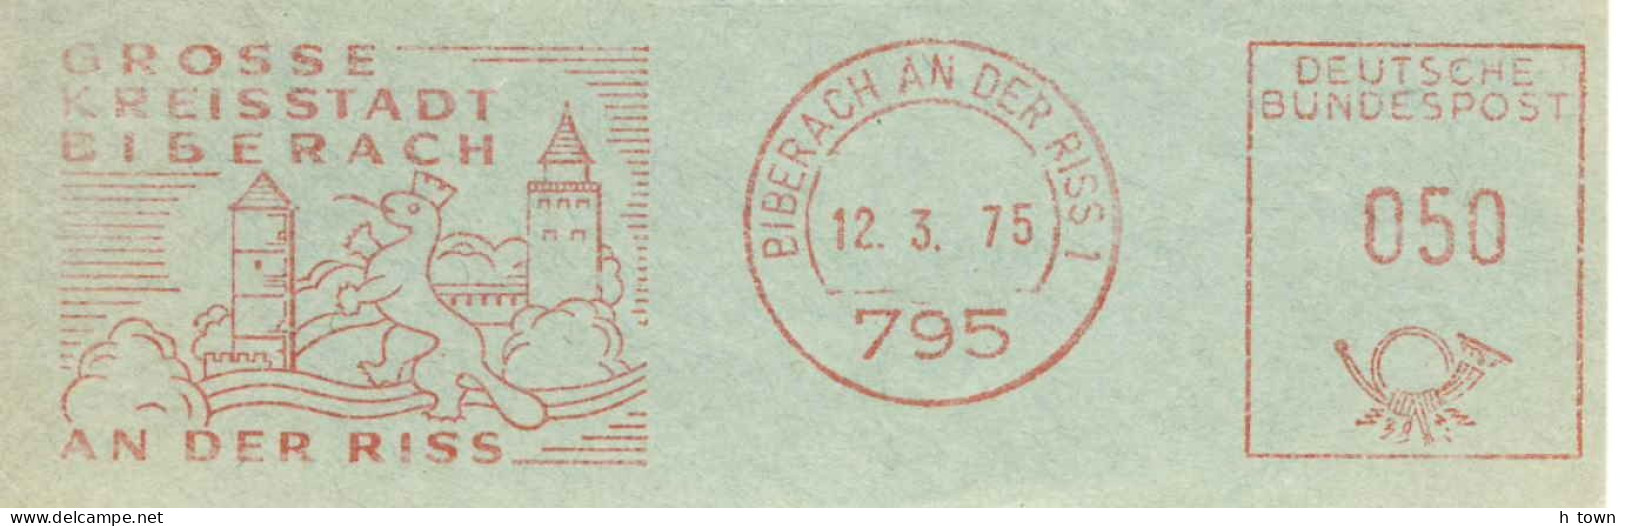 954  Castor: Ema D'Allemagne, 1975 - Beaver Meter Stamp From Biberach, Germany - Roedores